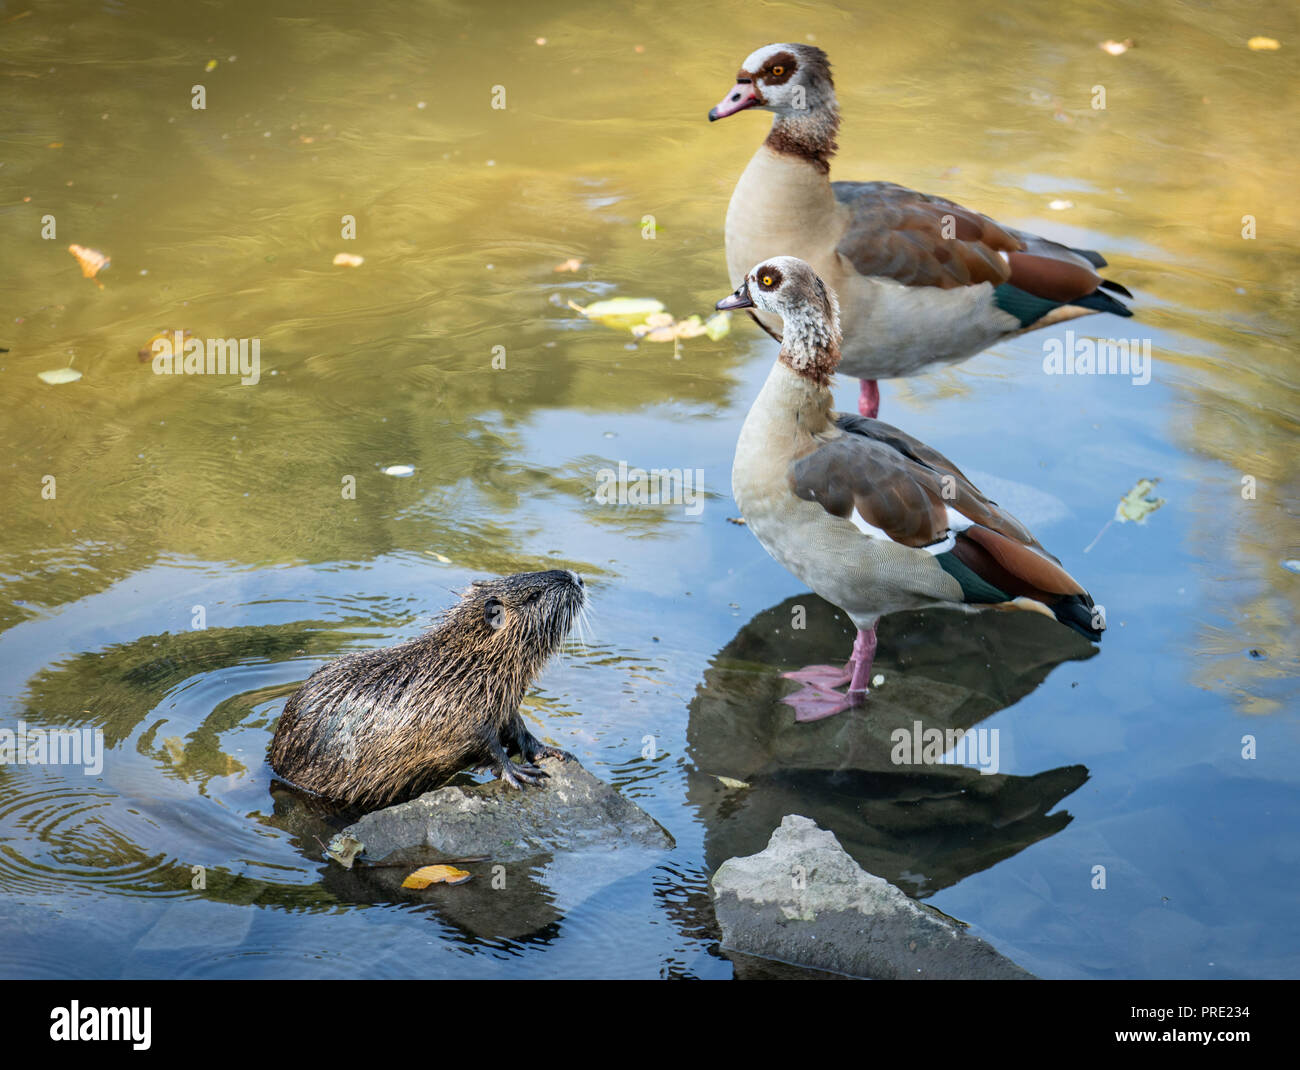 01 October 2018, Hessen, Frankfurt/Main: 01 October 2018, Germany, Frankfurt am Main: A Nutria (l.u.) rises out of the water in the small river Nidda next to two Nile geese. Nutrias and Nile geese are on the EU list of invasive alien species in Germany. Invasive' animals are those 'which threaten European biodiversity by displacing native species'. Photo: Frank Rumpenhorst/dpa Stock Photo